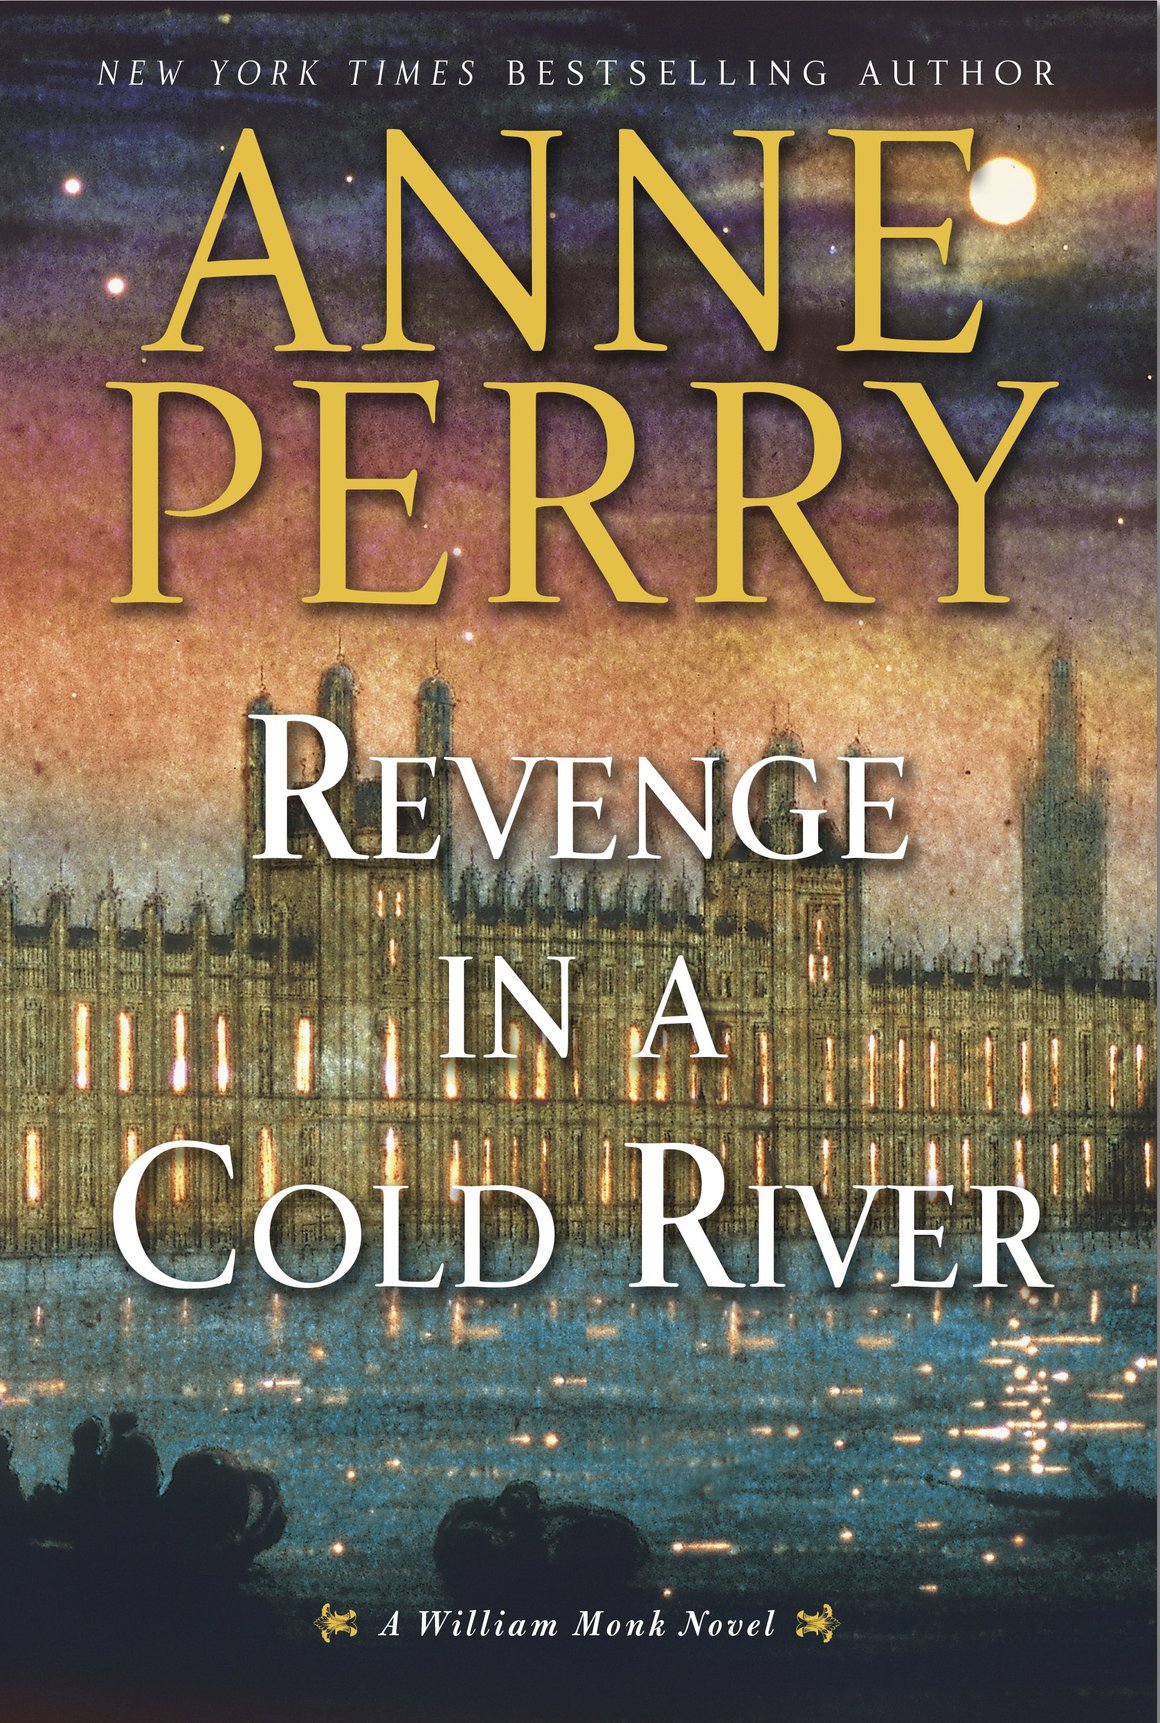 Revenge in a Cold River (2016) by Anne Perry